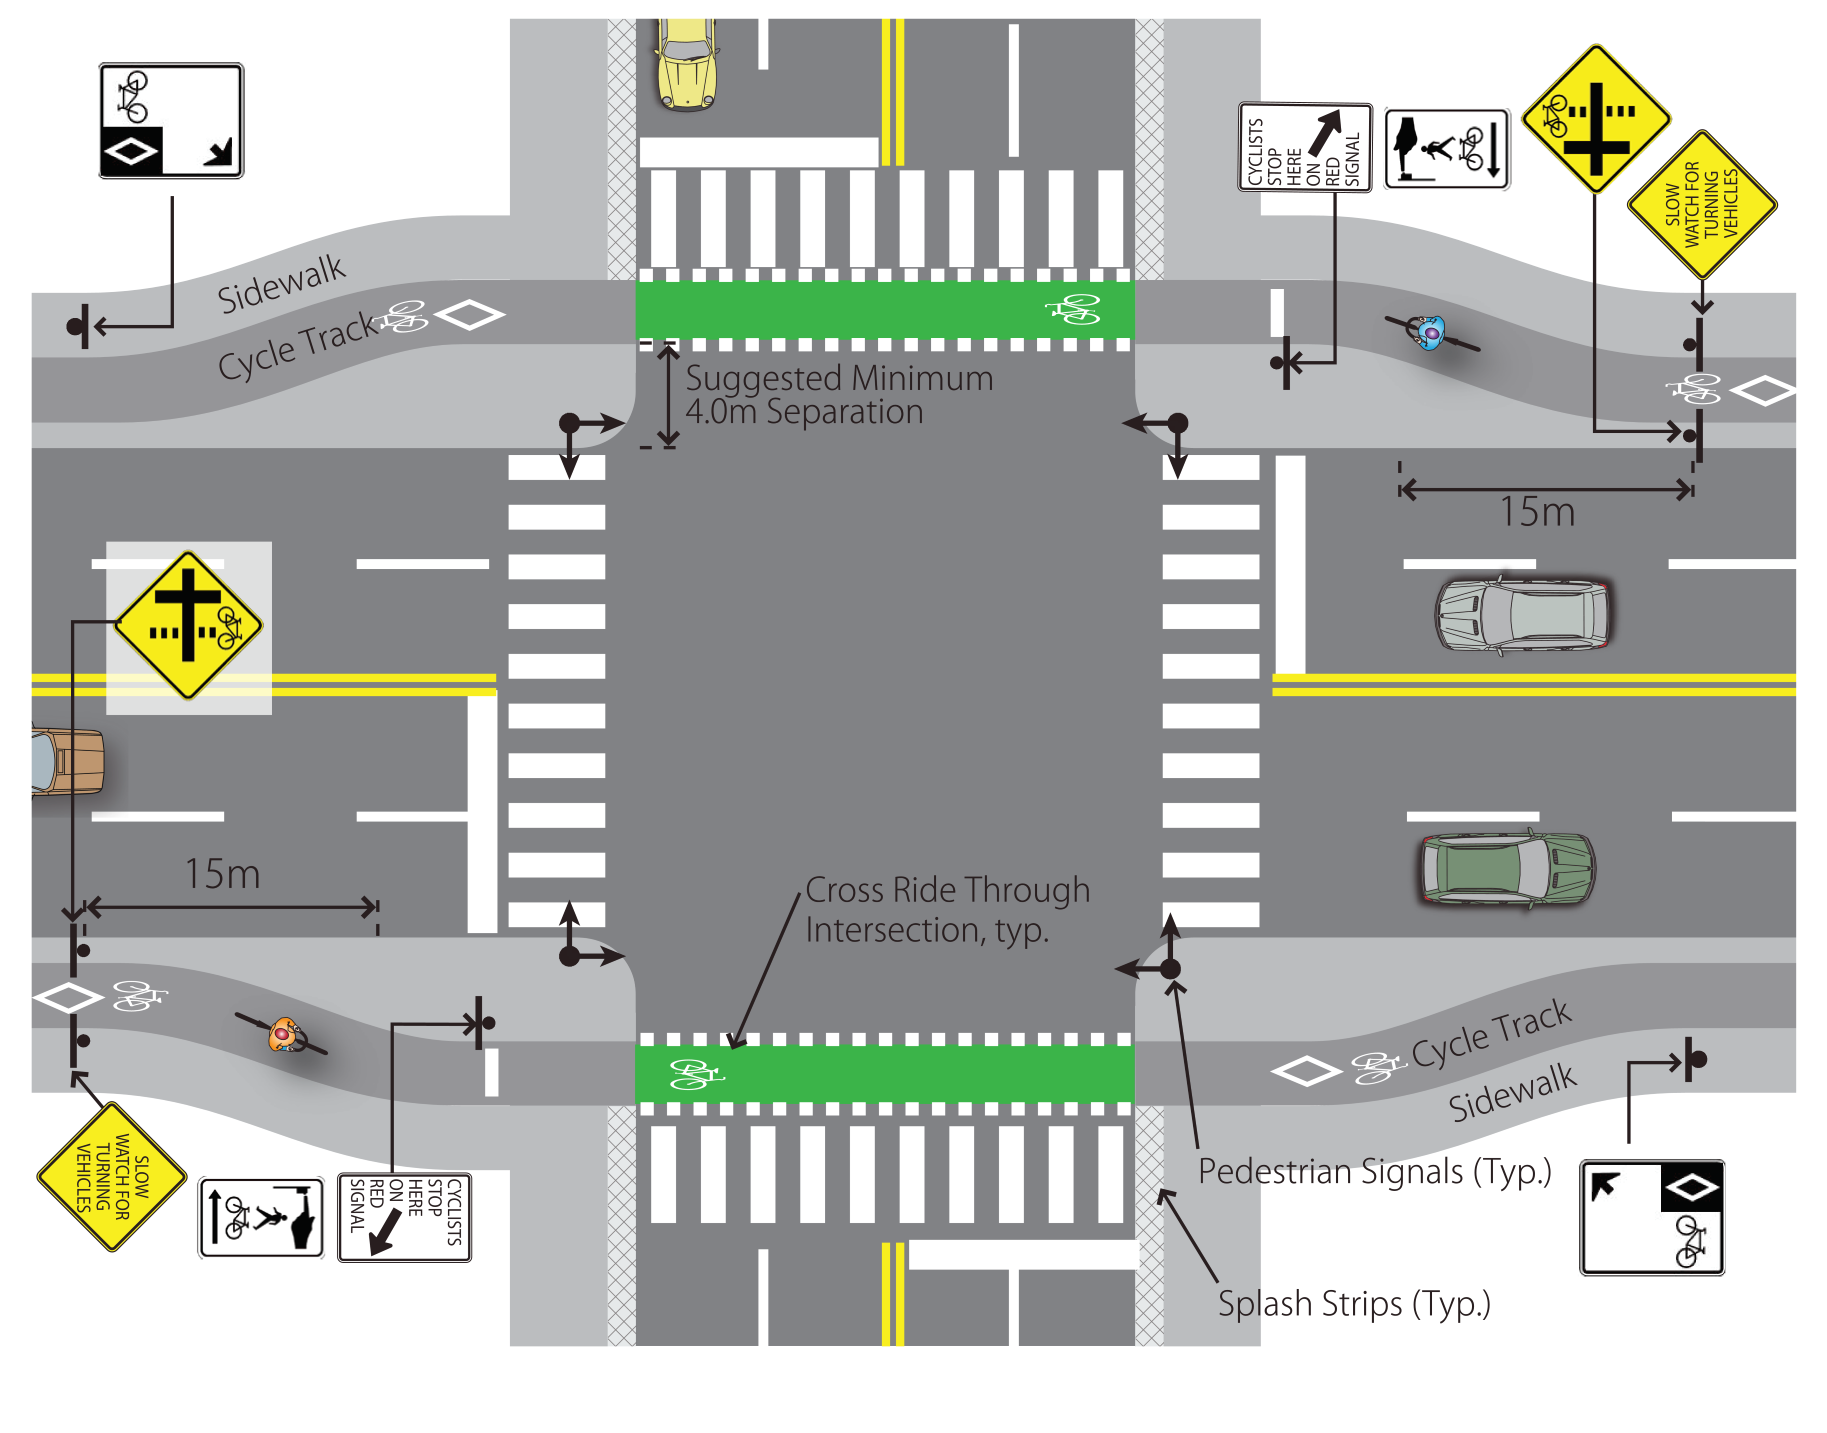 Overview of the proposed intersection